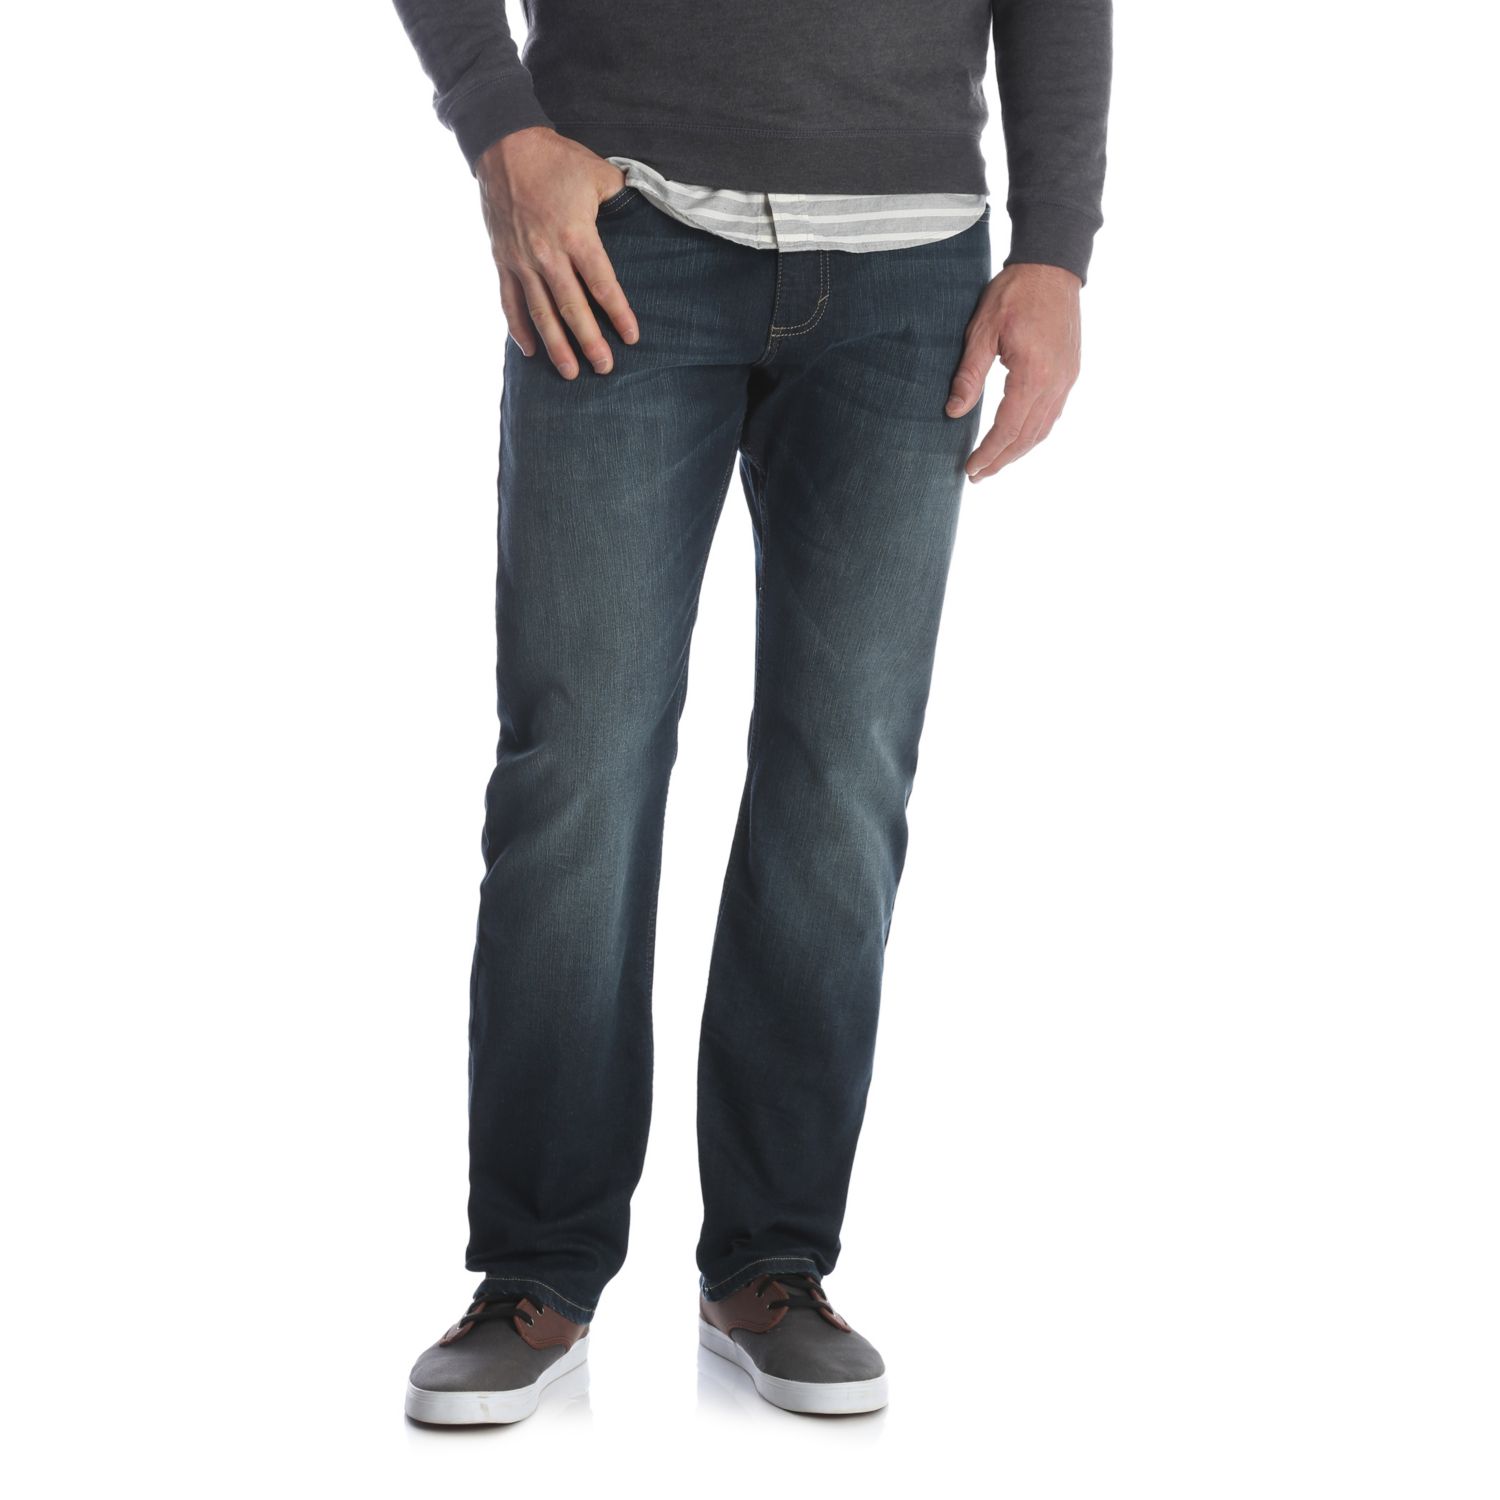 wrangler performance series relaxed fit